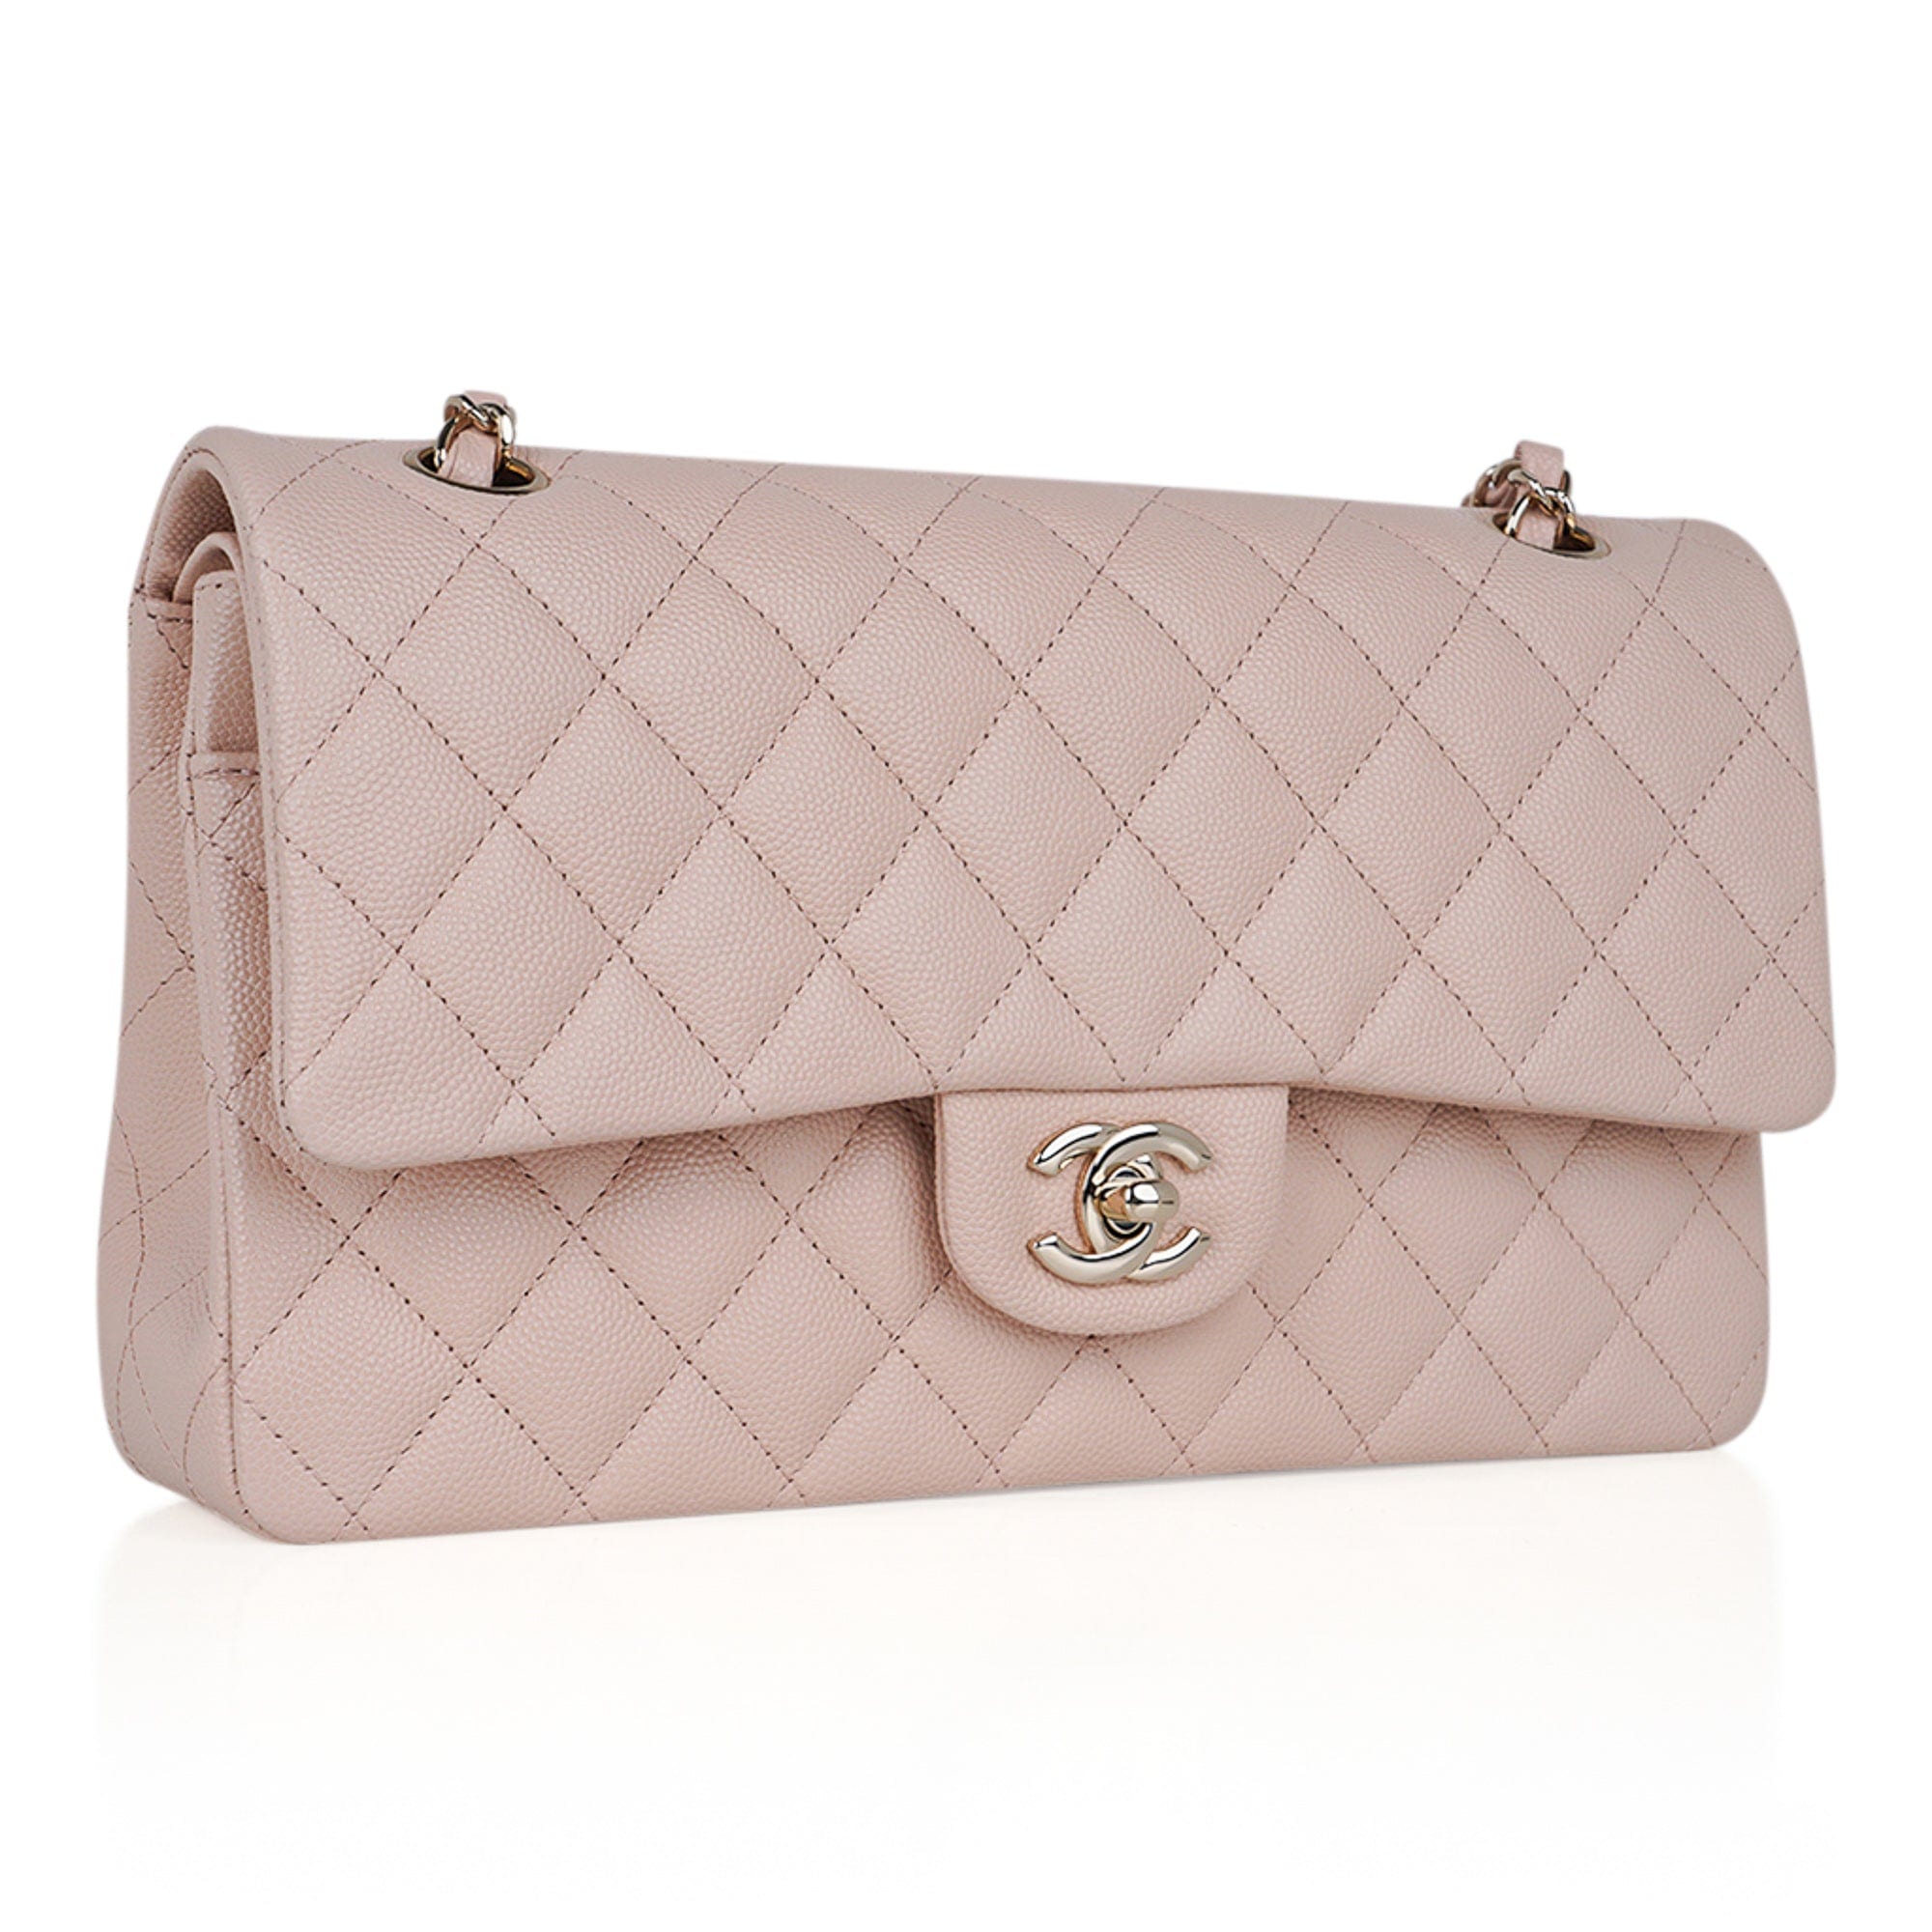 Chanel Beige Quilted Lambskin Leather Medium Classic Double Flap Bag